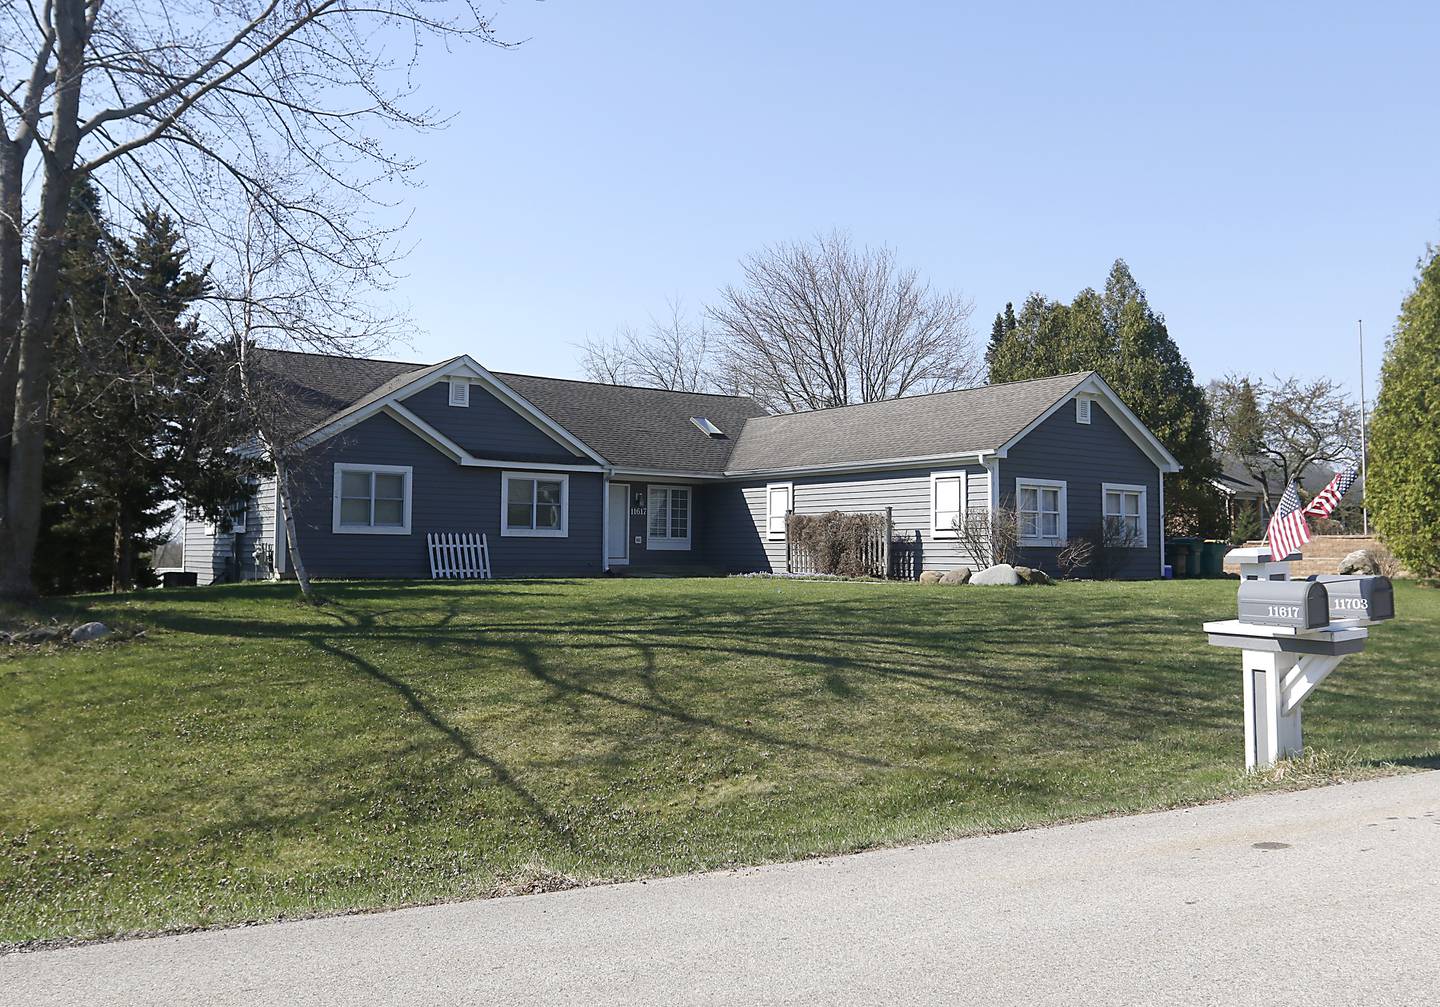 Prosecutors are seeking to have this home at 11617 Hawthorne Way in Huntley, photographed on April 12, 2023, forfeited. They have tied to the home to an alleged drug trafficking and money laundering operation they say was led by Matthew Lilla.